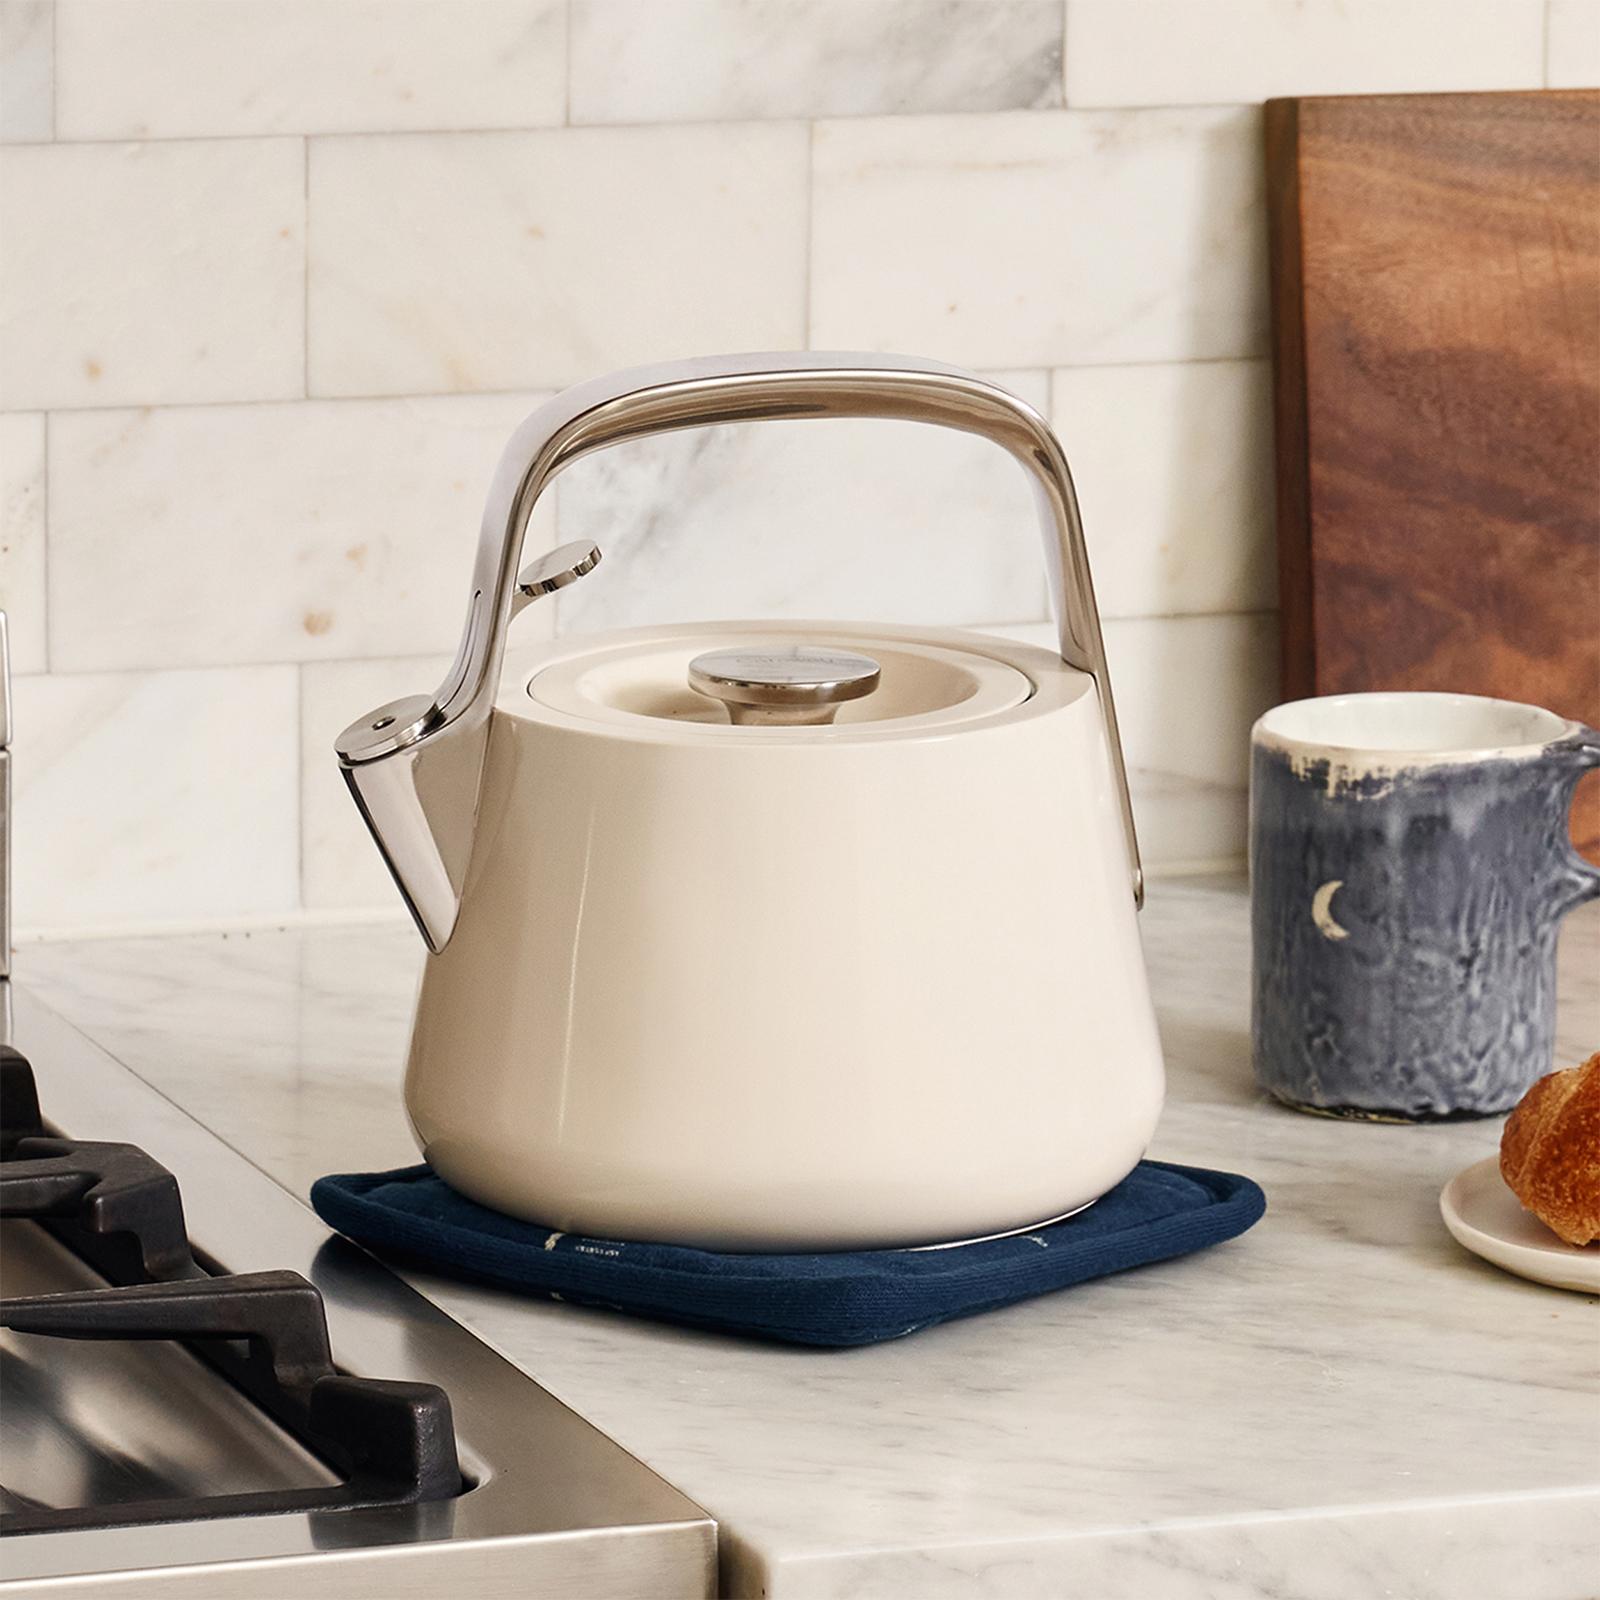 Caraway Tea Kettle - Is This The Best Kettle Available? 